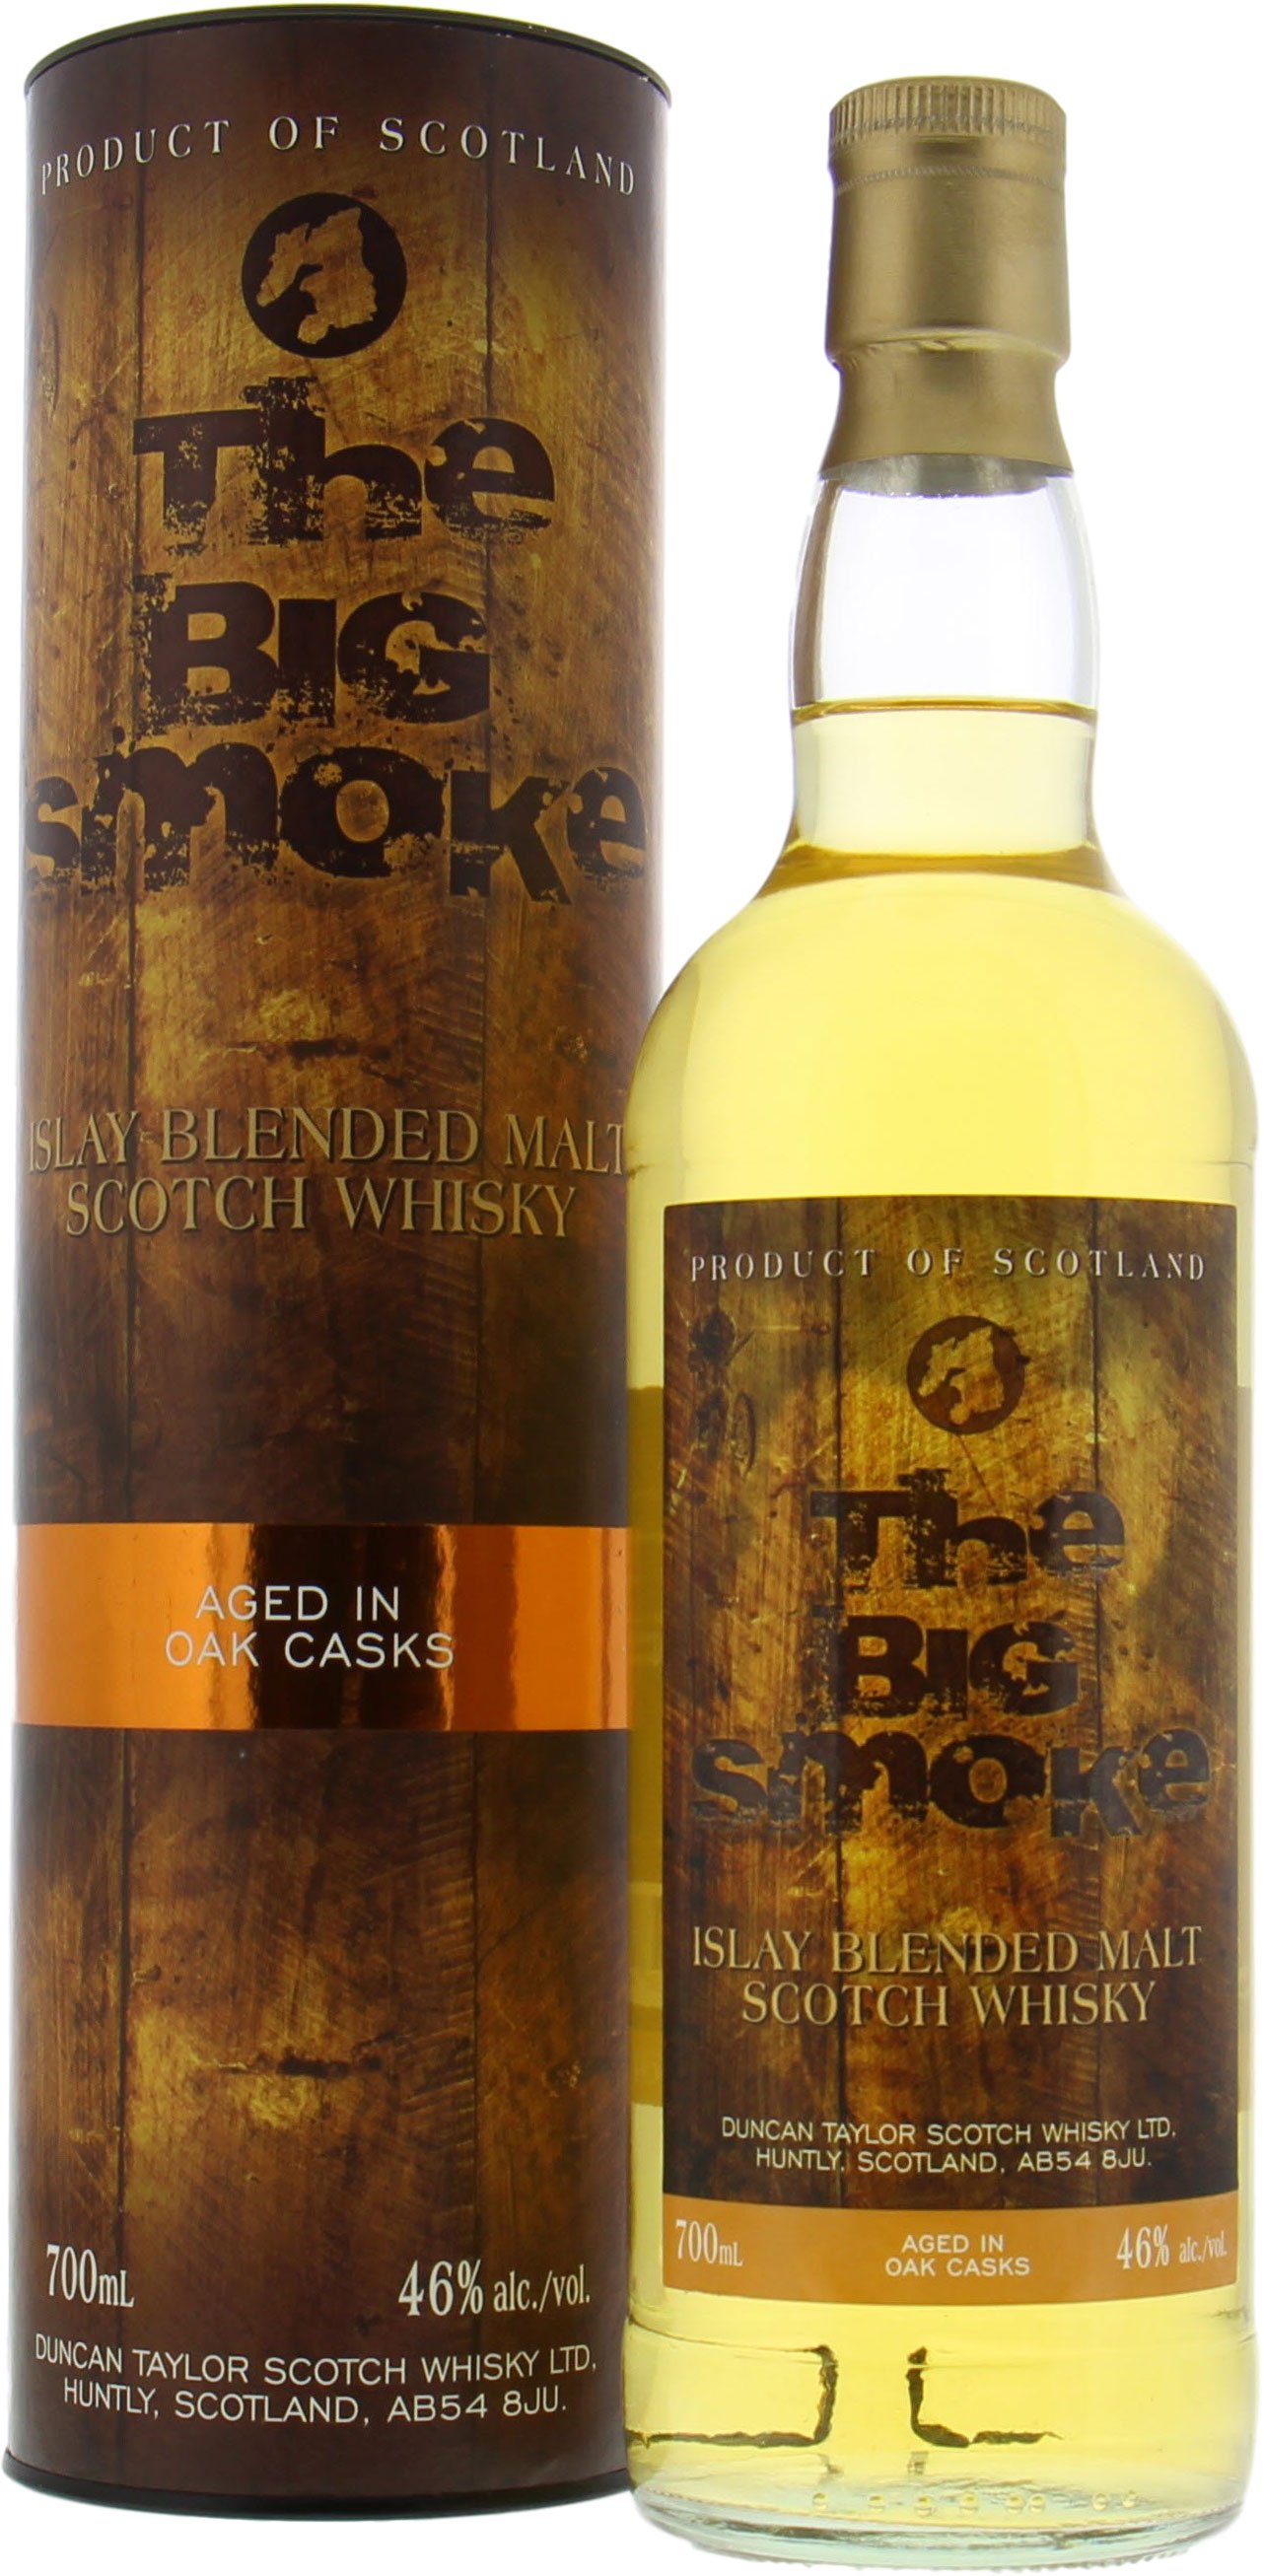 Duncan Taylor - The Big Smoke Islay Blended Malt 46% NV IN Original Container